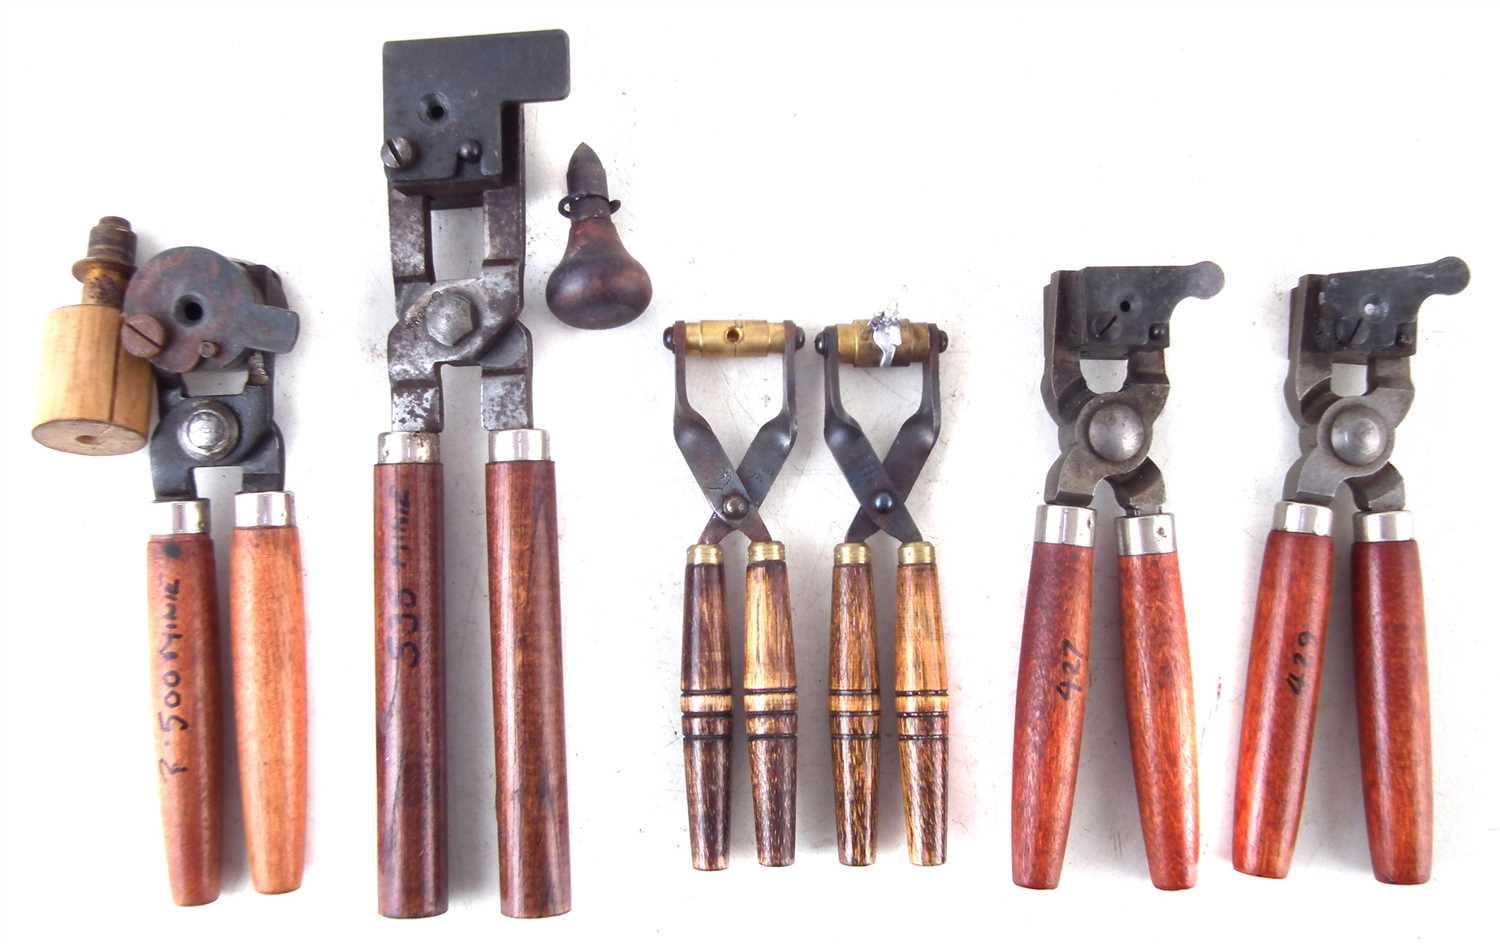 Two Lyman bullet moulds, an RCBS mould and three others